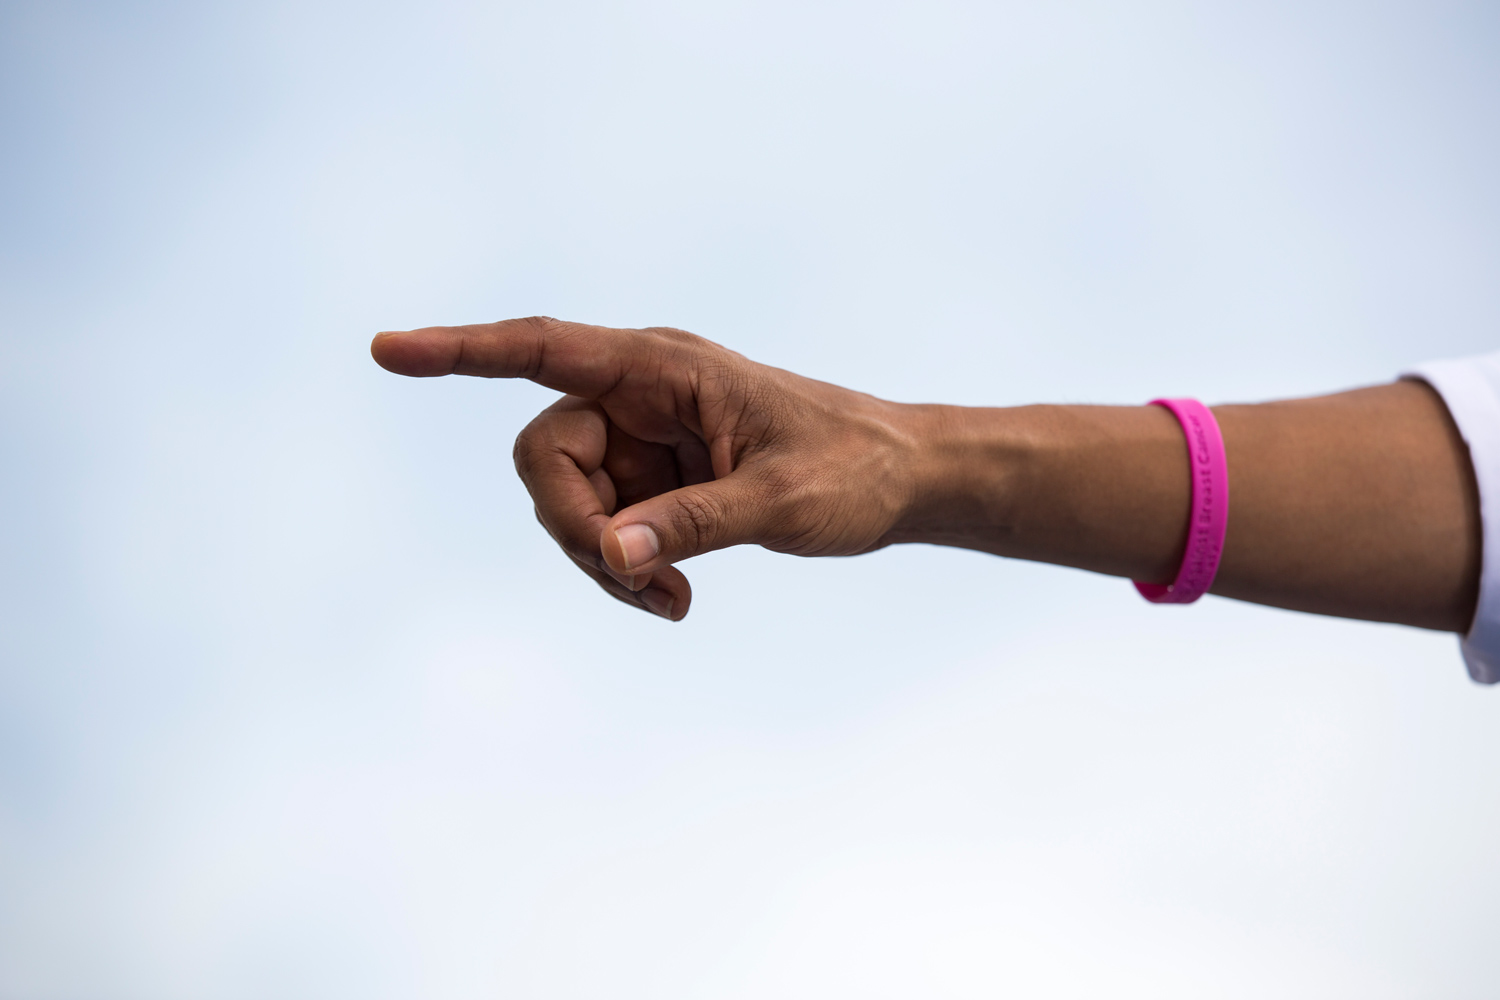 Image: Oct. 25, 2012. President Obama attends a campaign rally in Tampa. He is wearing a pink bracelet in support of breast cancer awareness, an important issue with women voters.